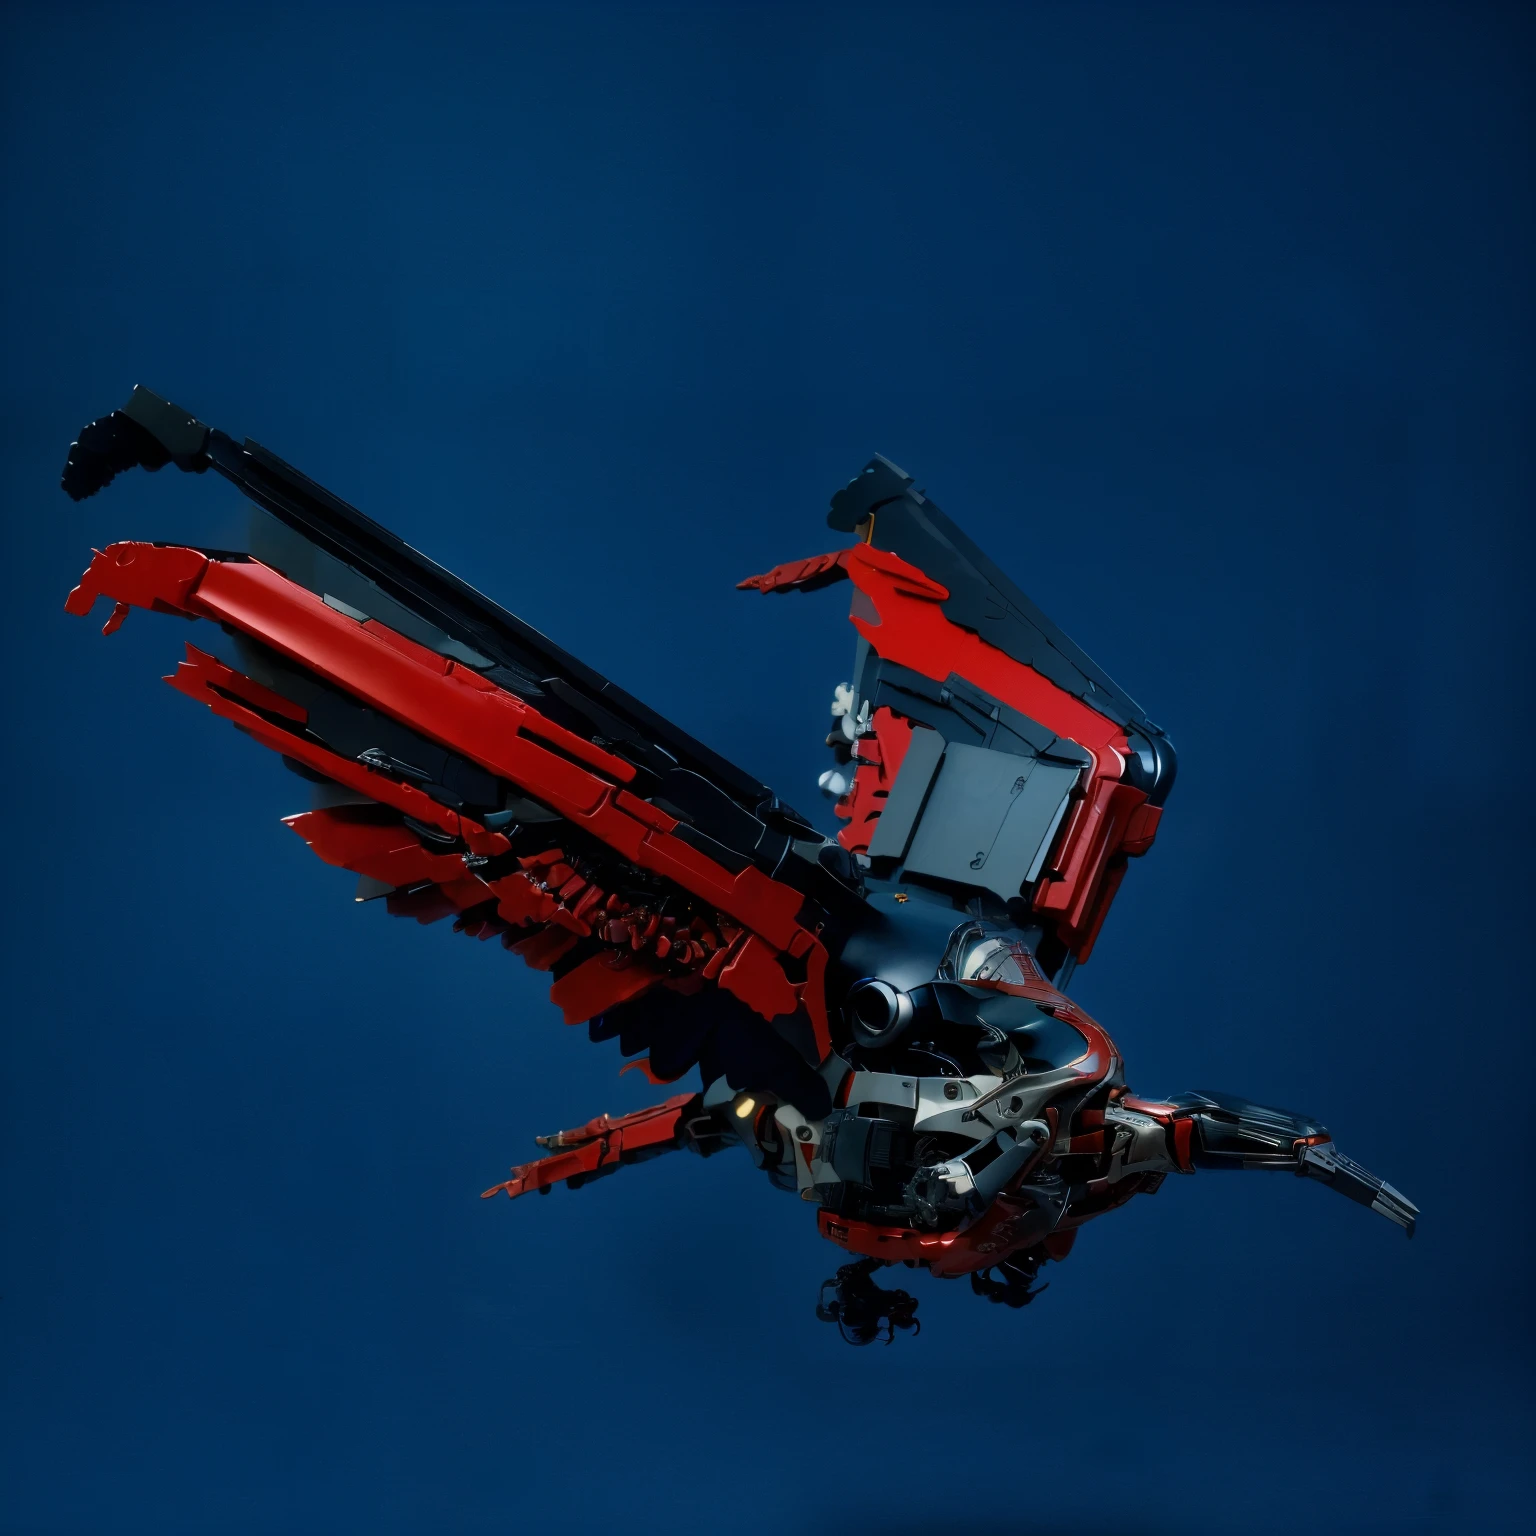 there is a red and black transformer standing on a desk, mecha wings, 3 d render n - 9, sharp robot dragon claws, photo realistic mp3 player transformed into a robot bird, flying robot, red and black robotic parts, cyborg wing, pterodactyl mecha, robot bird, mechanical wings, neon genesis evangelion style